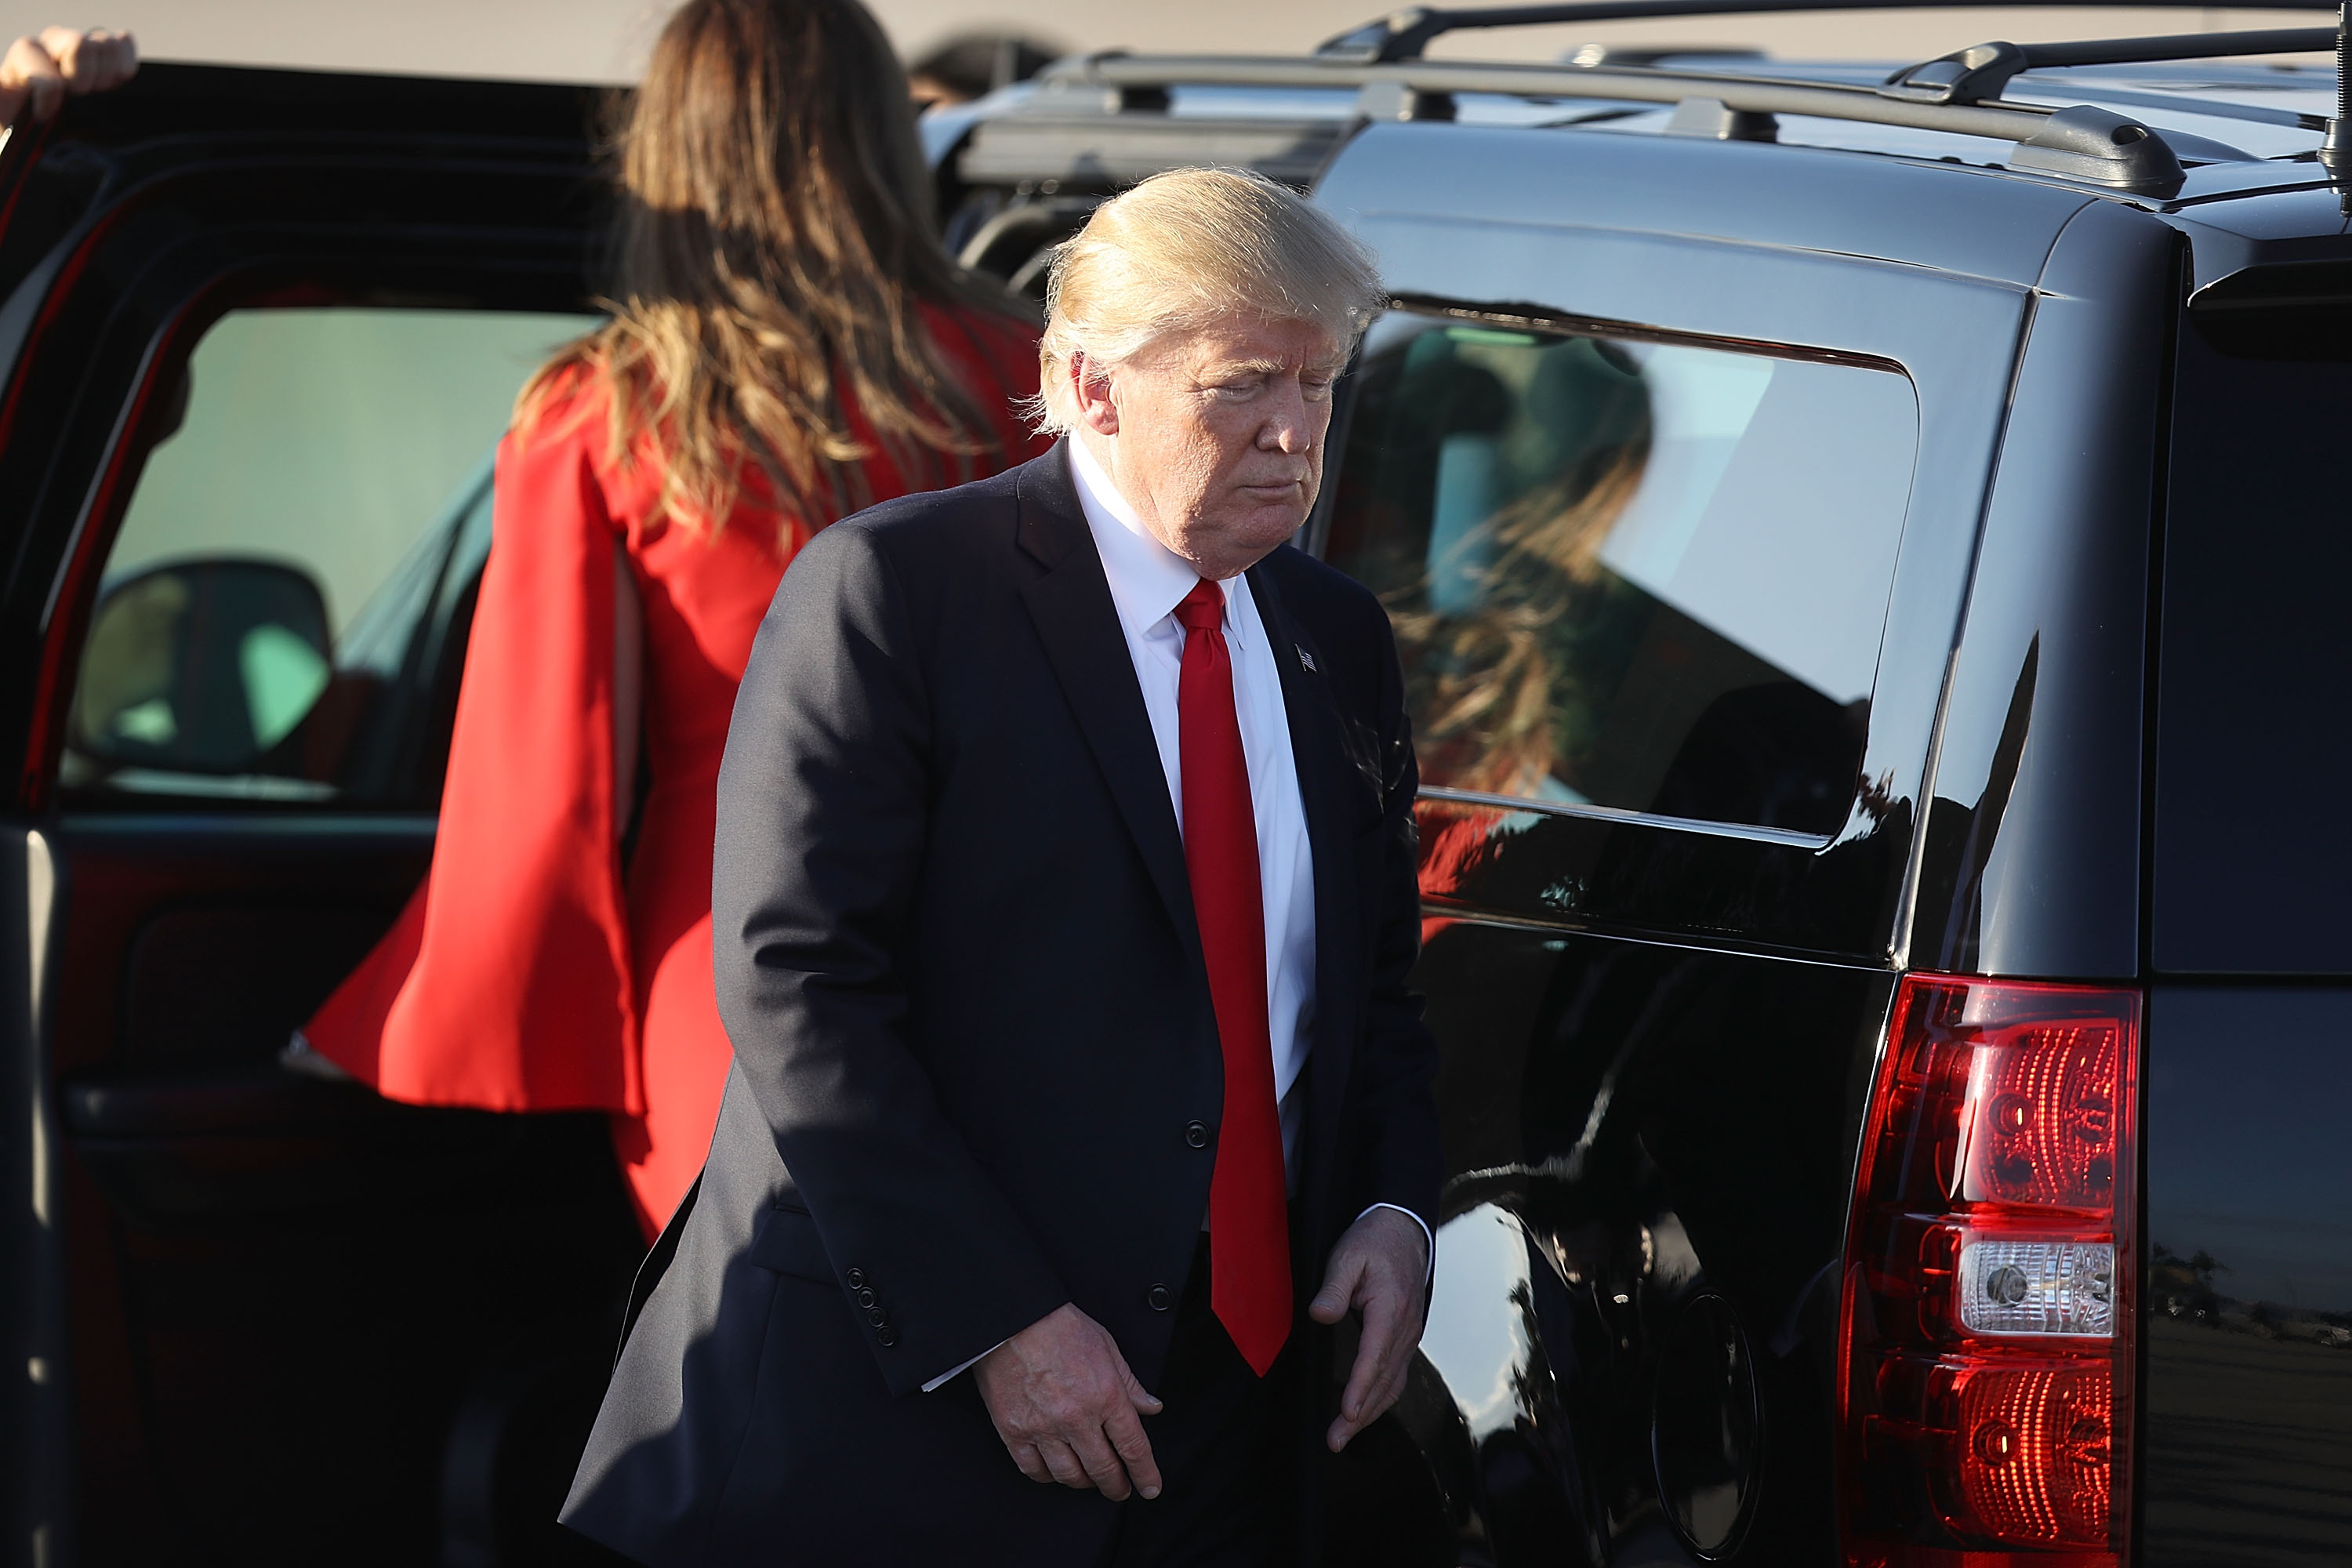 U.S. President Donald Trump walks to his vehicle after arriving on Air Force One at the Palm Beach International Airport for a visit to his Mar-a-Lago Resort for the weekend on February 3, 2017 in Palm Beach, Florida.  Joe Raedle—Getty Images (Joe Raedle—Getty Images)